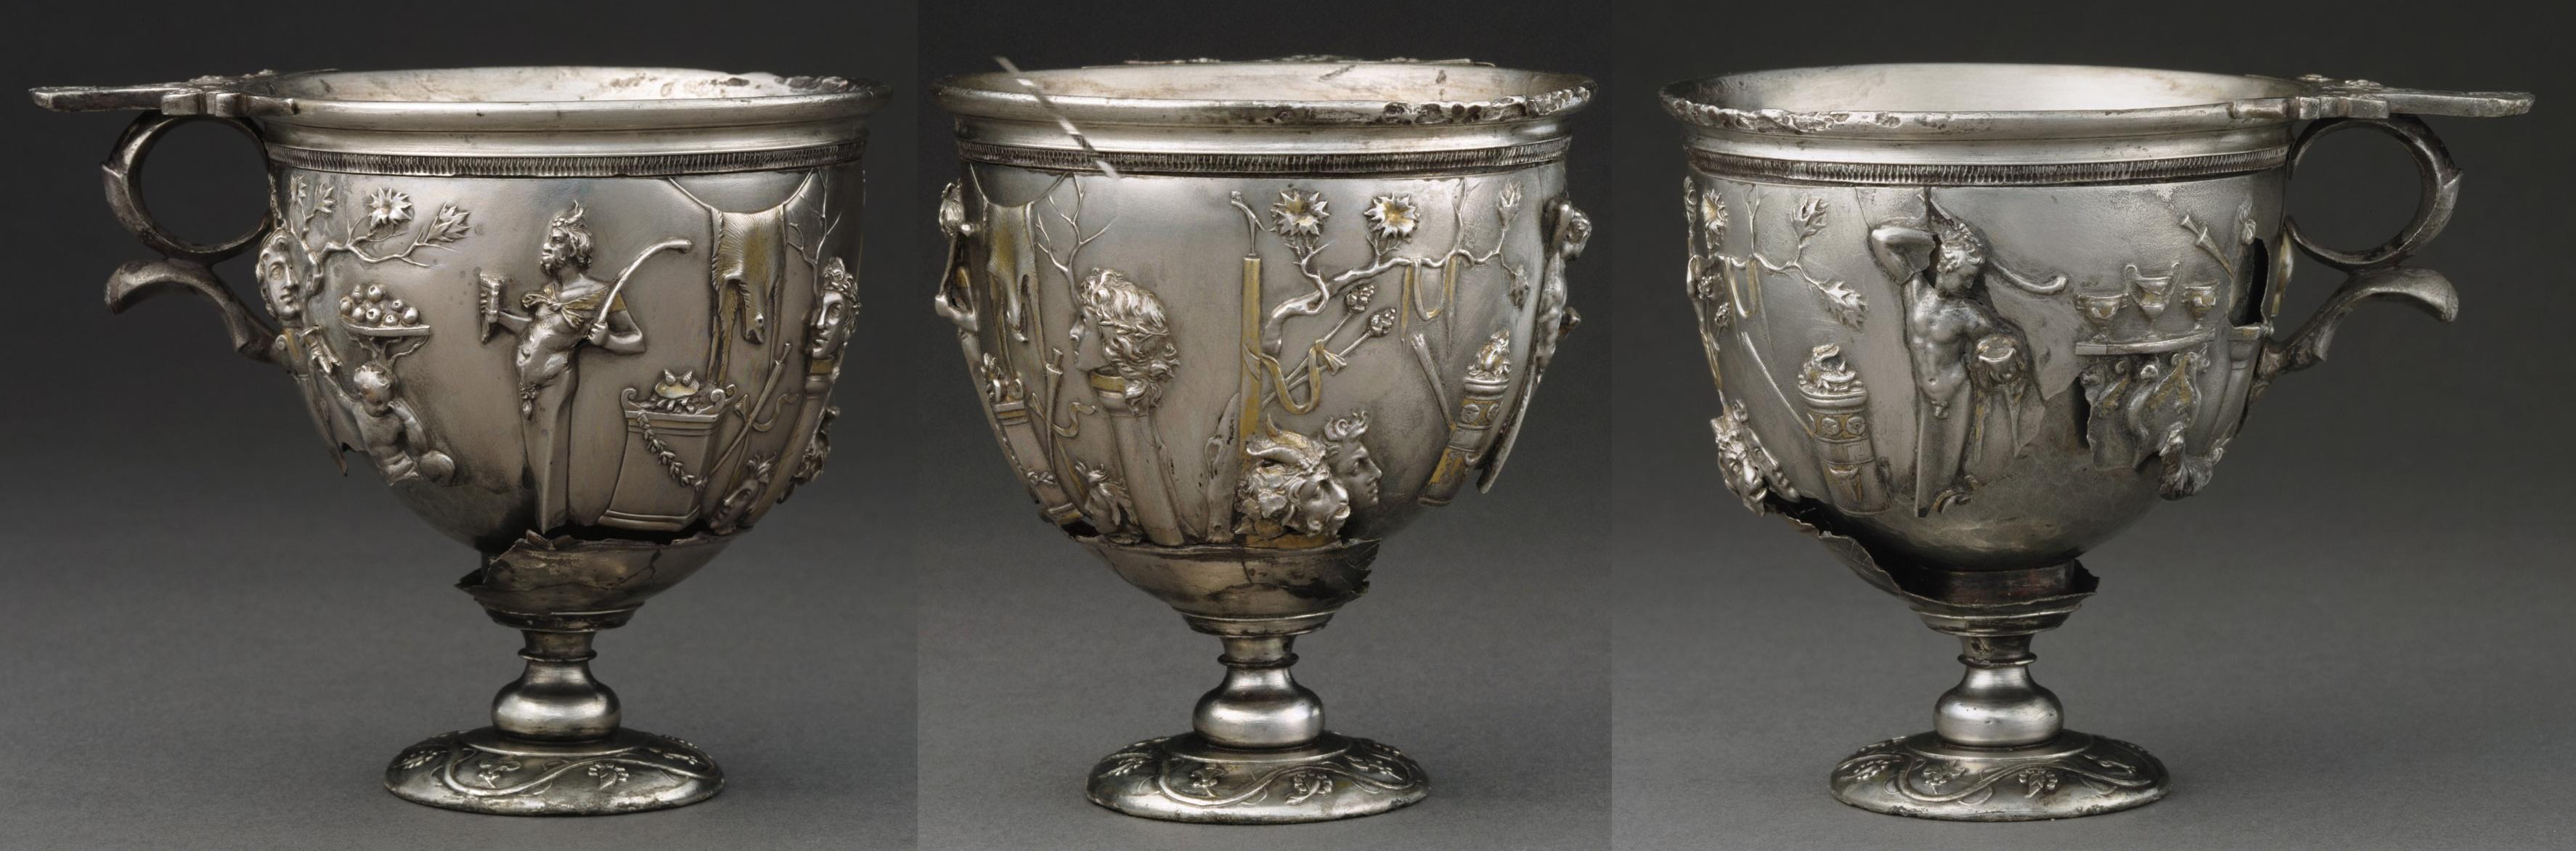 Roman silver cup with Bacchic & Orphic scenes. 1st c. CE. Princeton art museum, nr. 2000-356.jpg